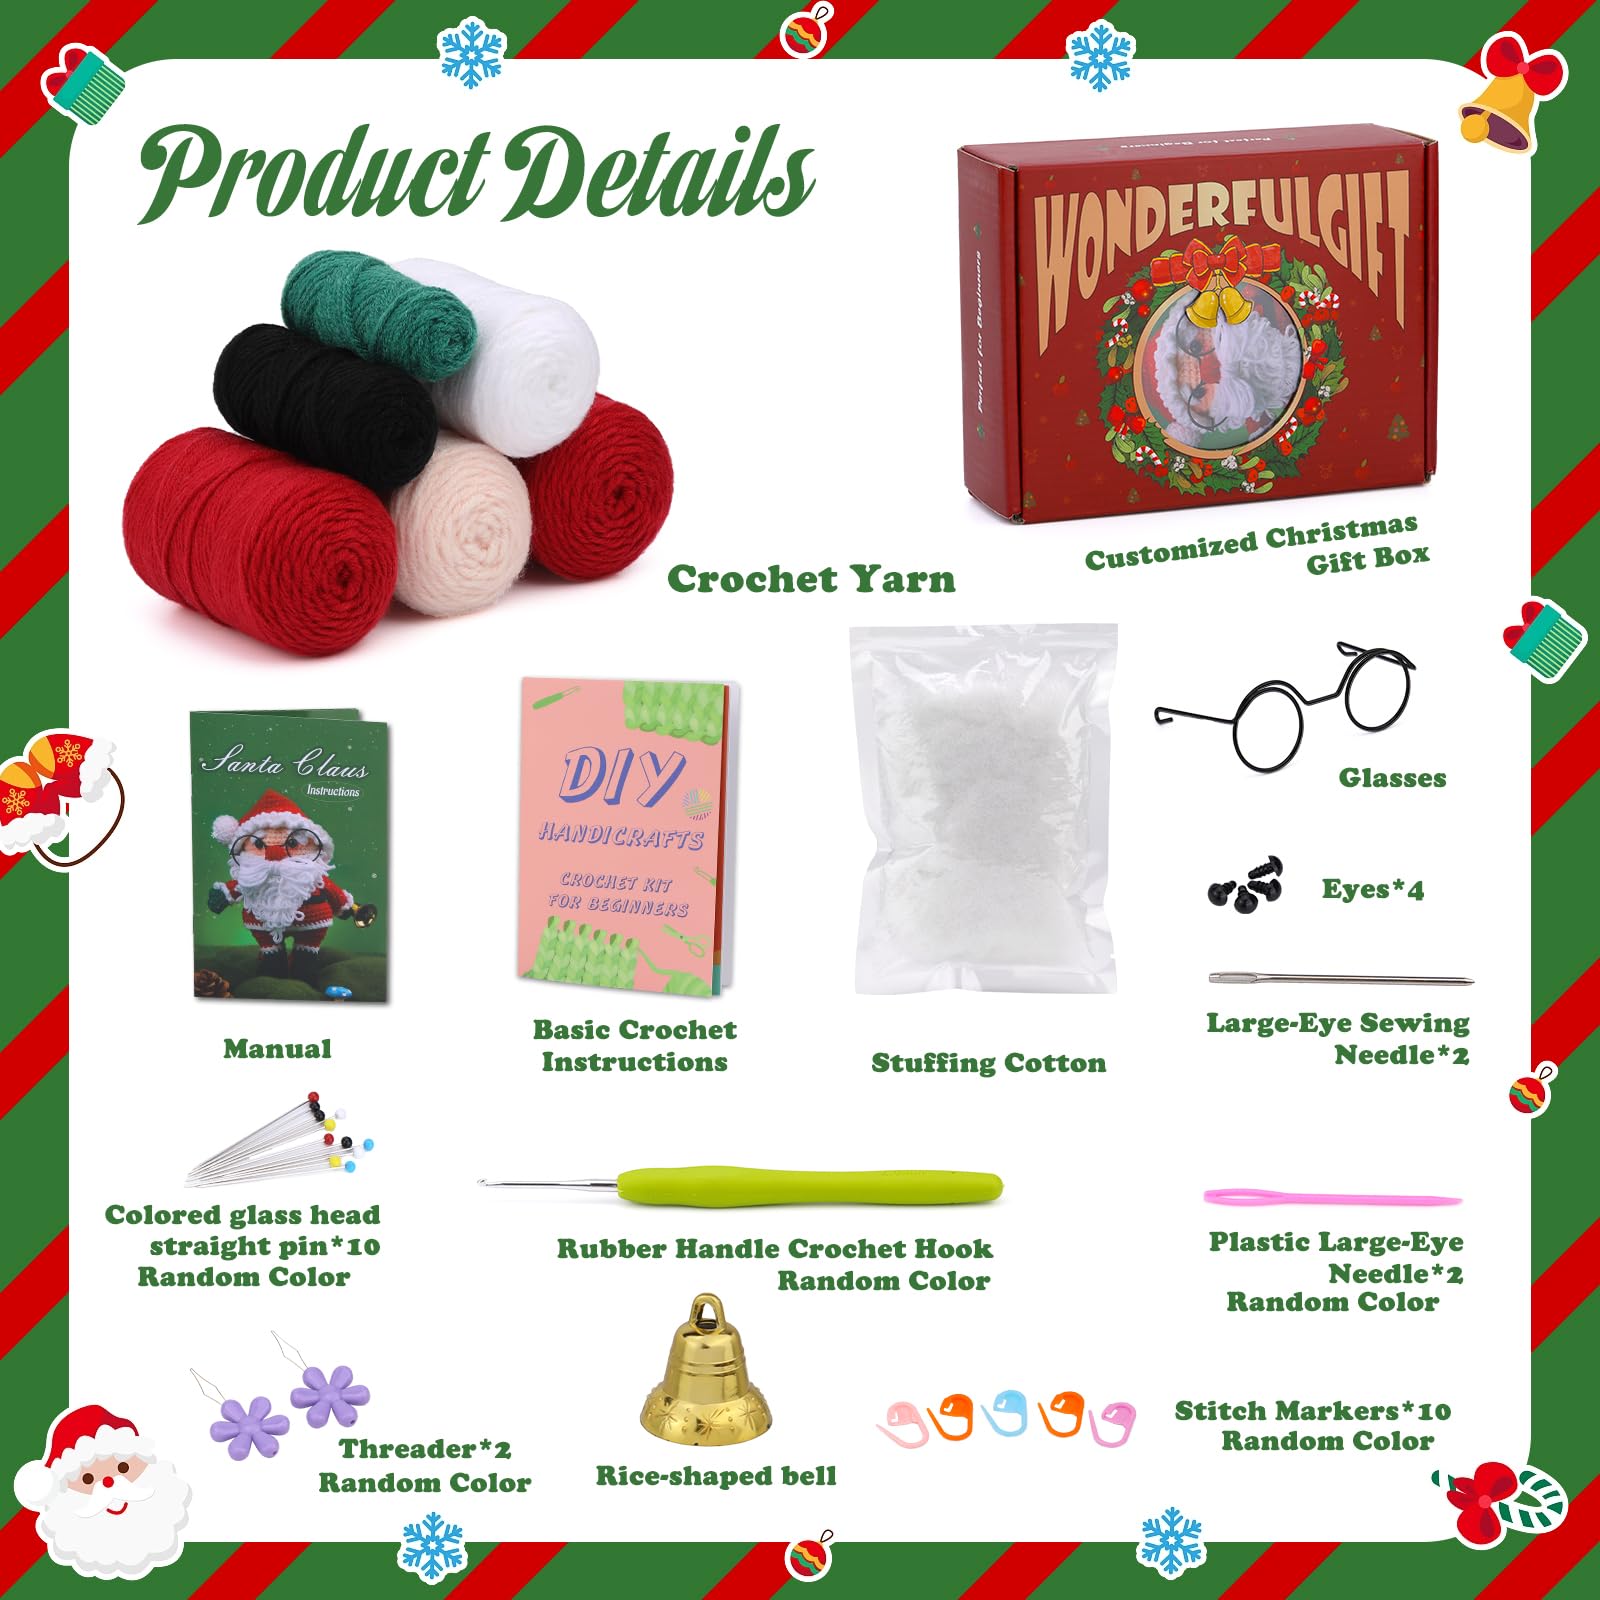  QUEISHA Christmas Crochet Kit for Beginners,Cute Elk&Santa  Claus Kit with Hook Yarn Picture&Text Instructions and Step-by-Step Video  Tutorials as Christmas Gifts for Kids